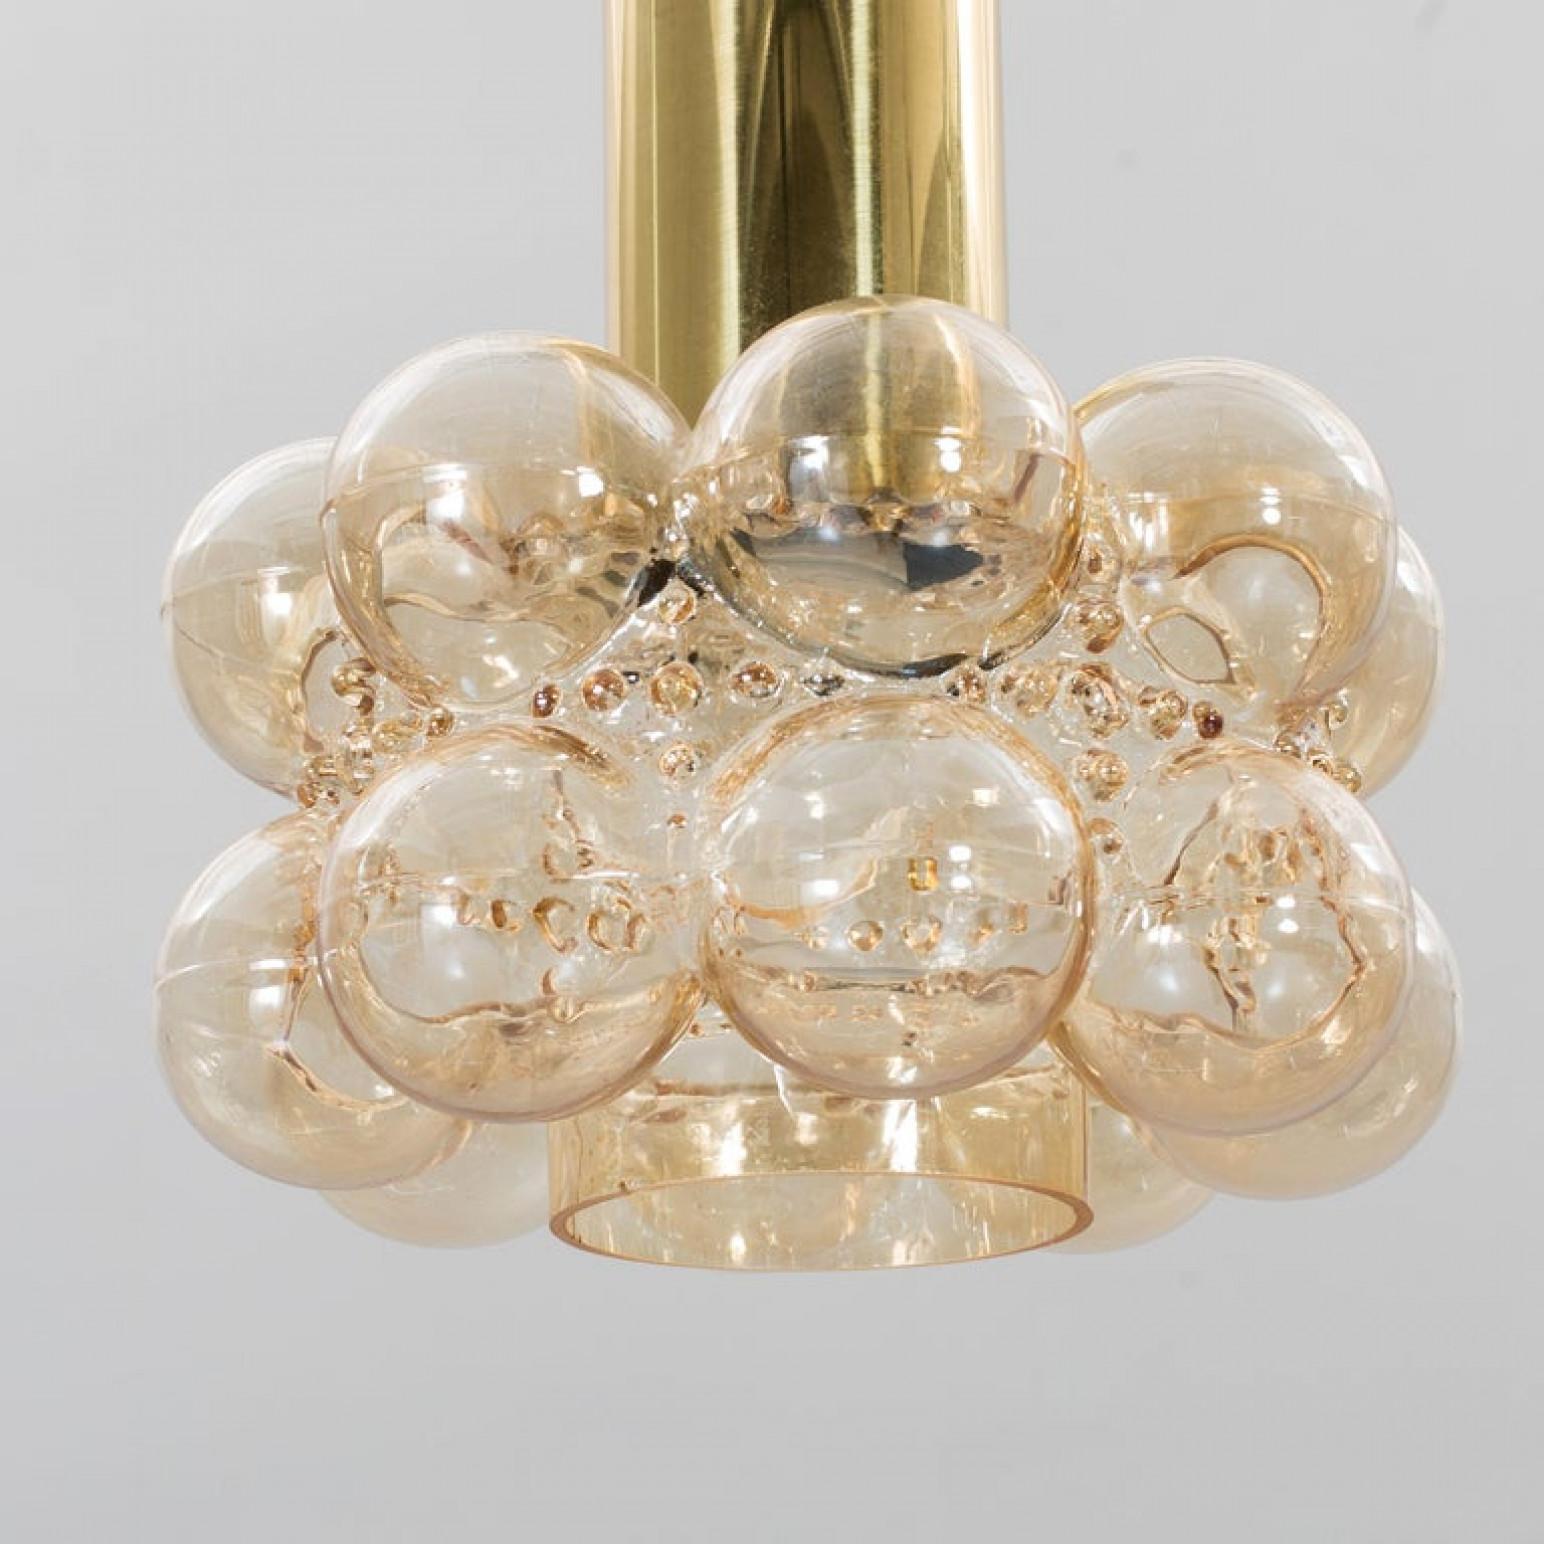 One of the six beautiful bubble glass chandeliers or pendant lights designed by Helena Tynell for Glashütte Limburg. A design Classic, the hand blown glass gives a wonderful warm glow.

The dimensions: Height 80 cm from ceiling, the diameter 30 cm.